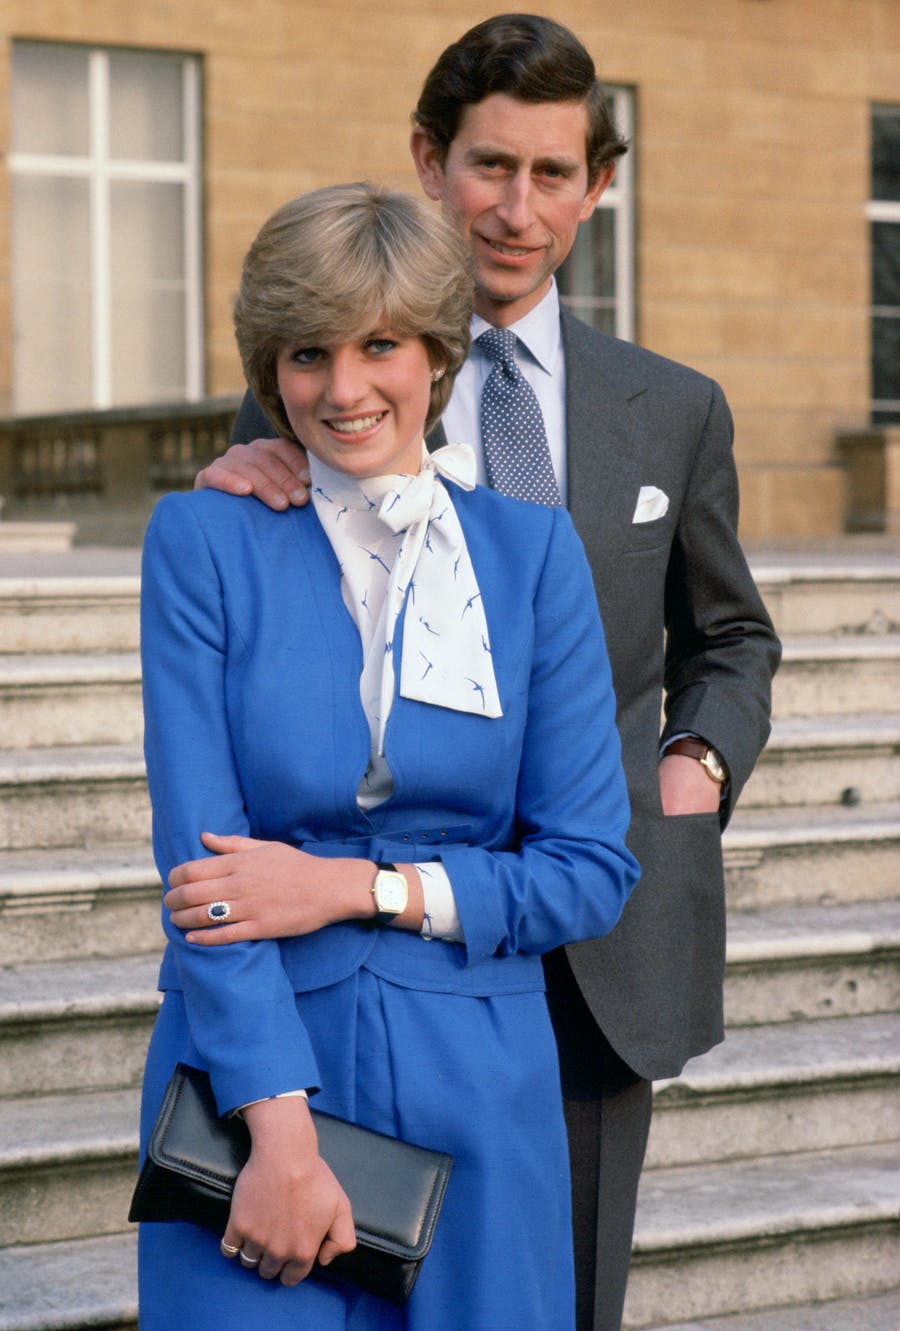 Prince Charles And Lady Diana Spencer (later To Become Princess Diana) At Buckingham Palace On The Day Of Announcing Their Engagement (Photo by Tim Graham Photo Library via Getty Images)